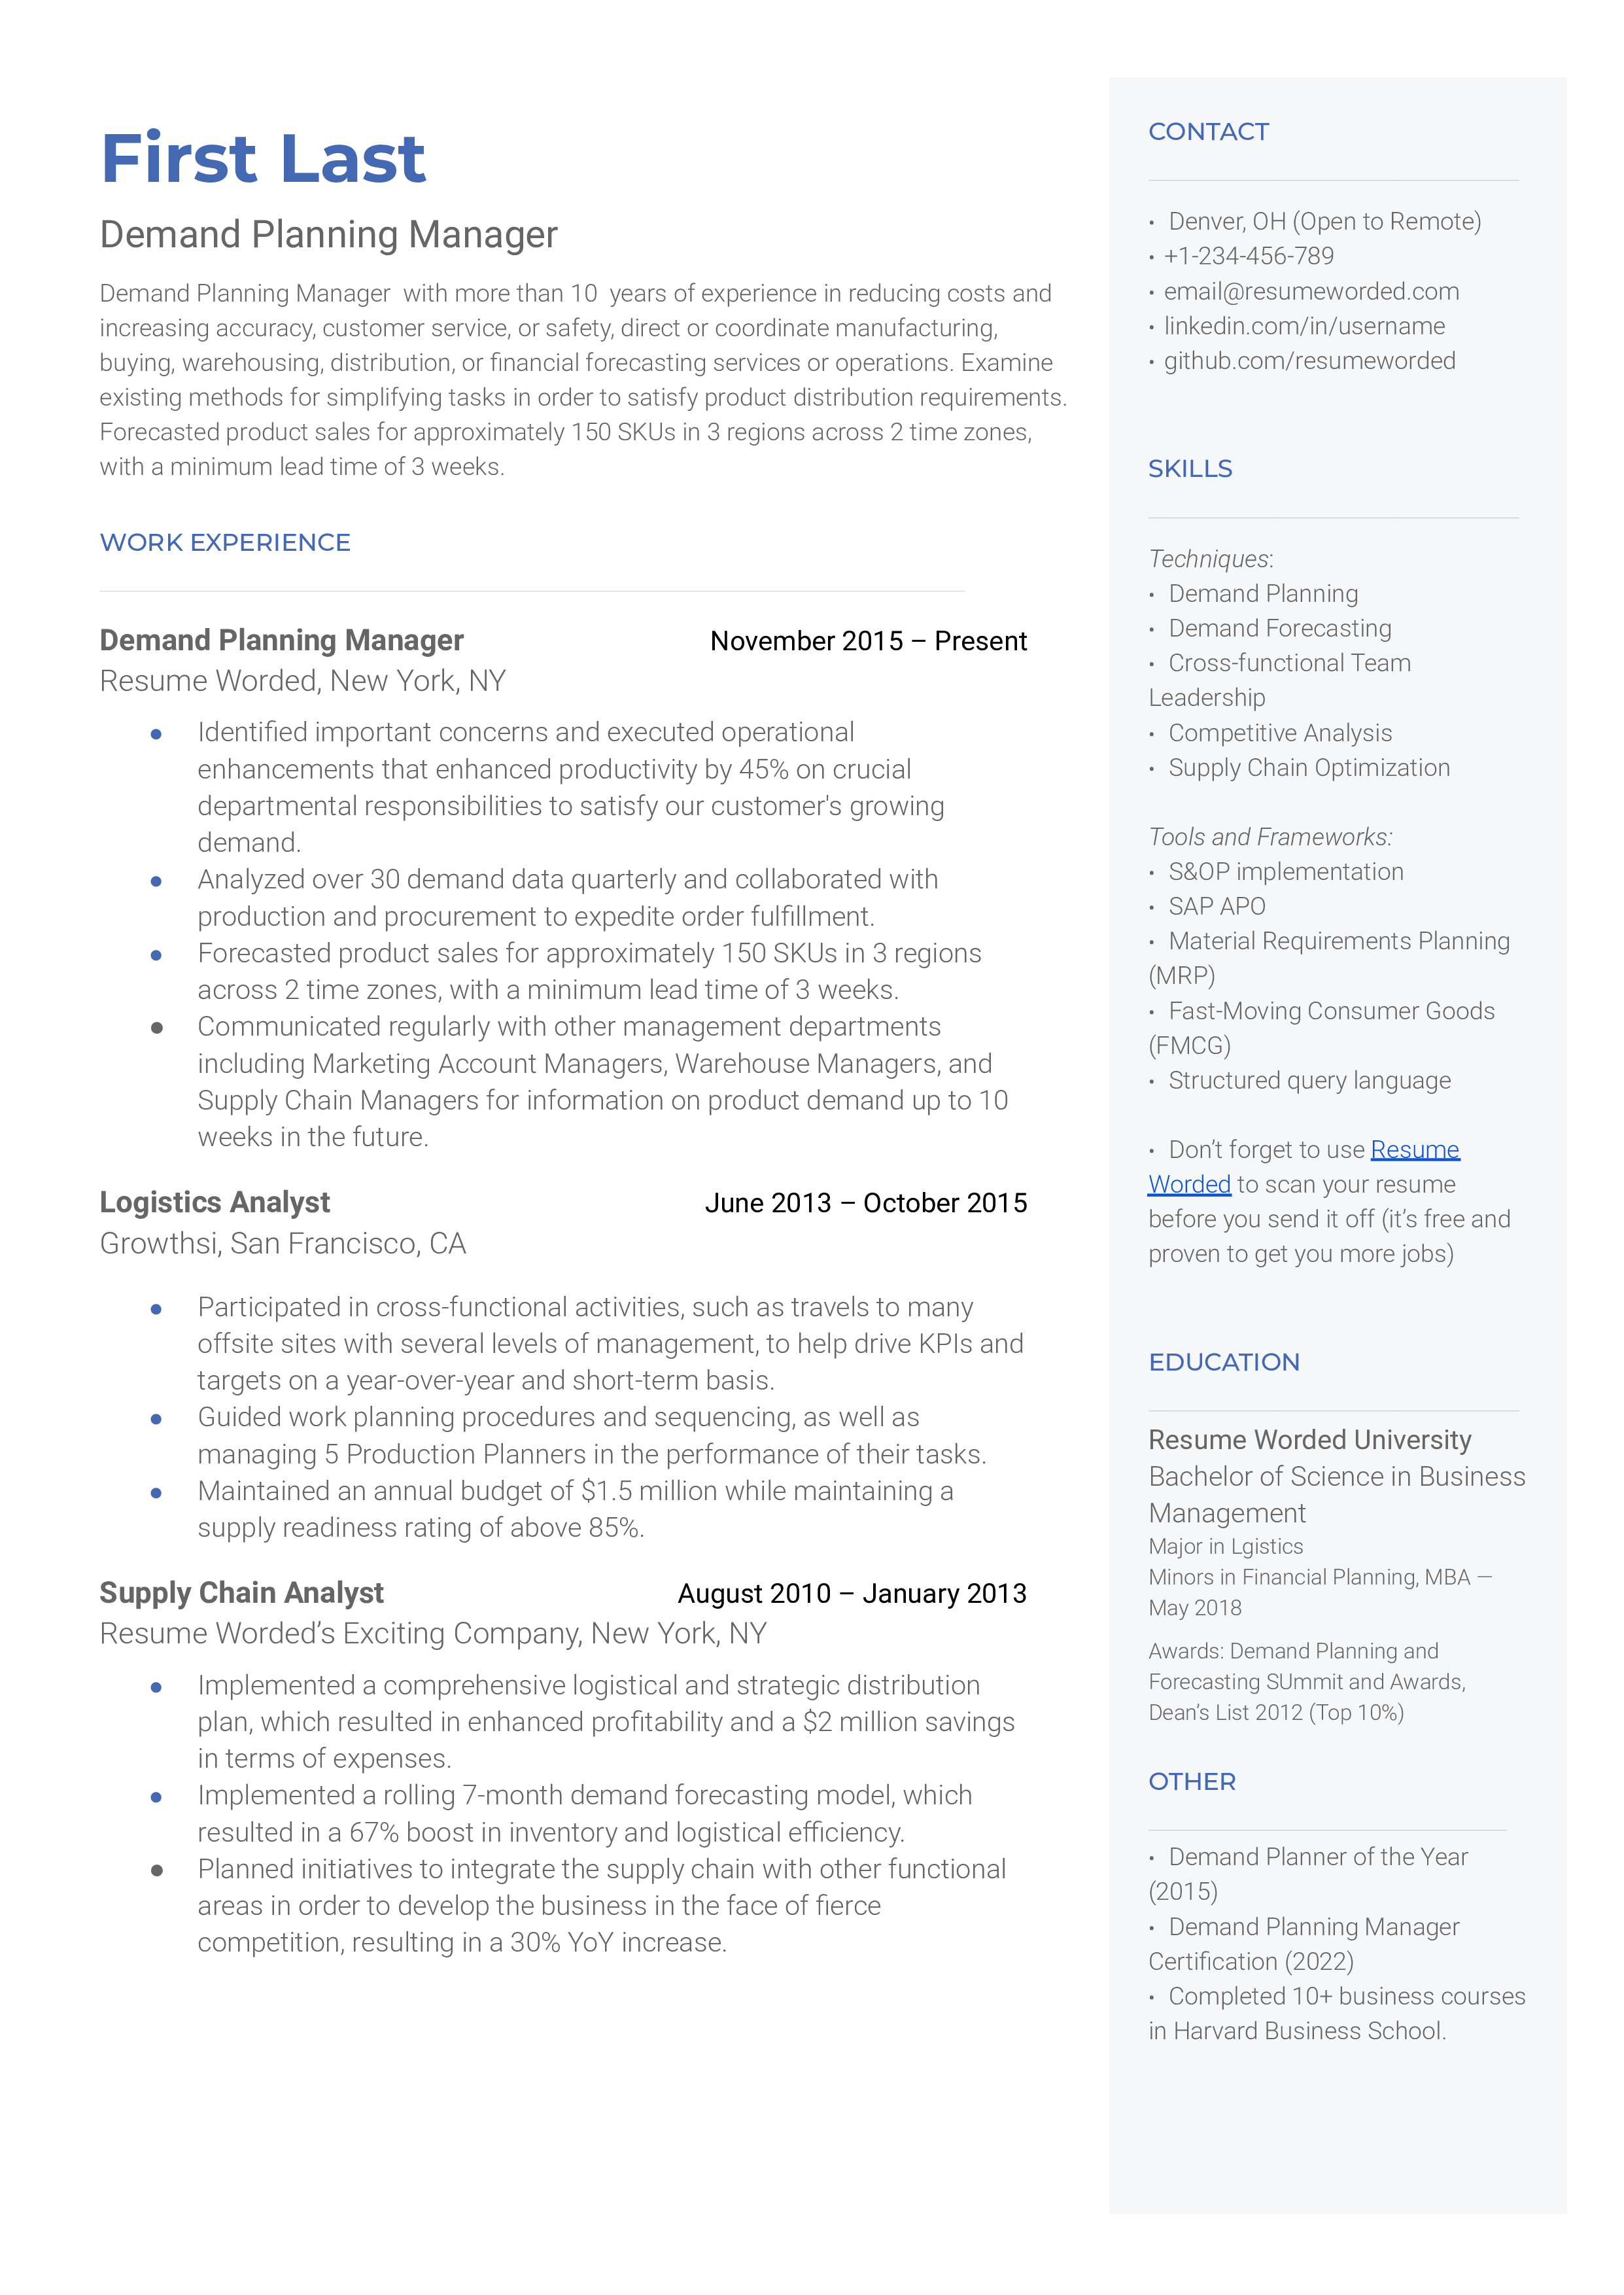 Professional CV of a Demand Planning Manager.